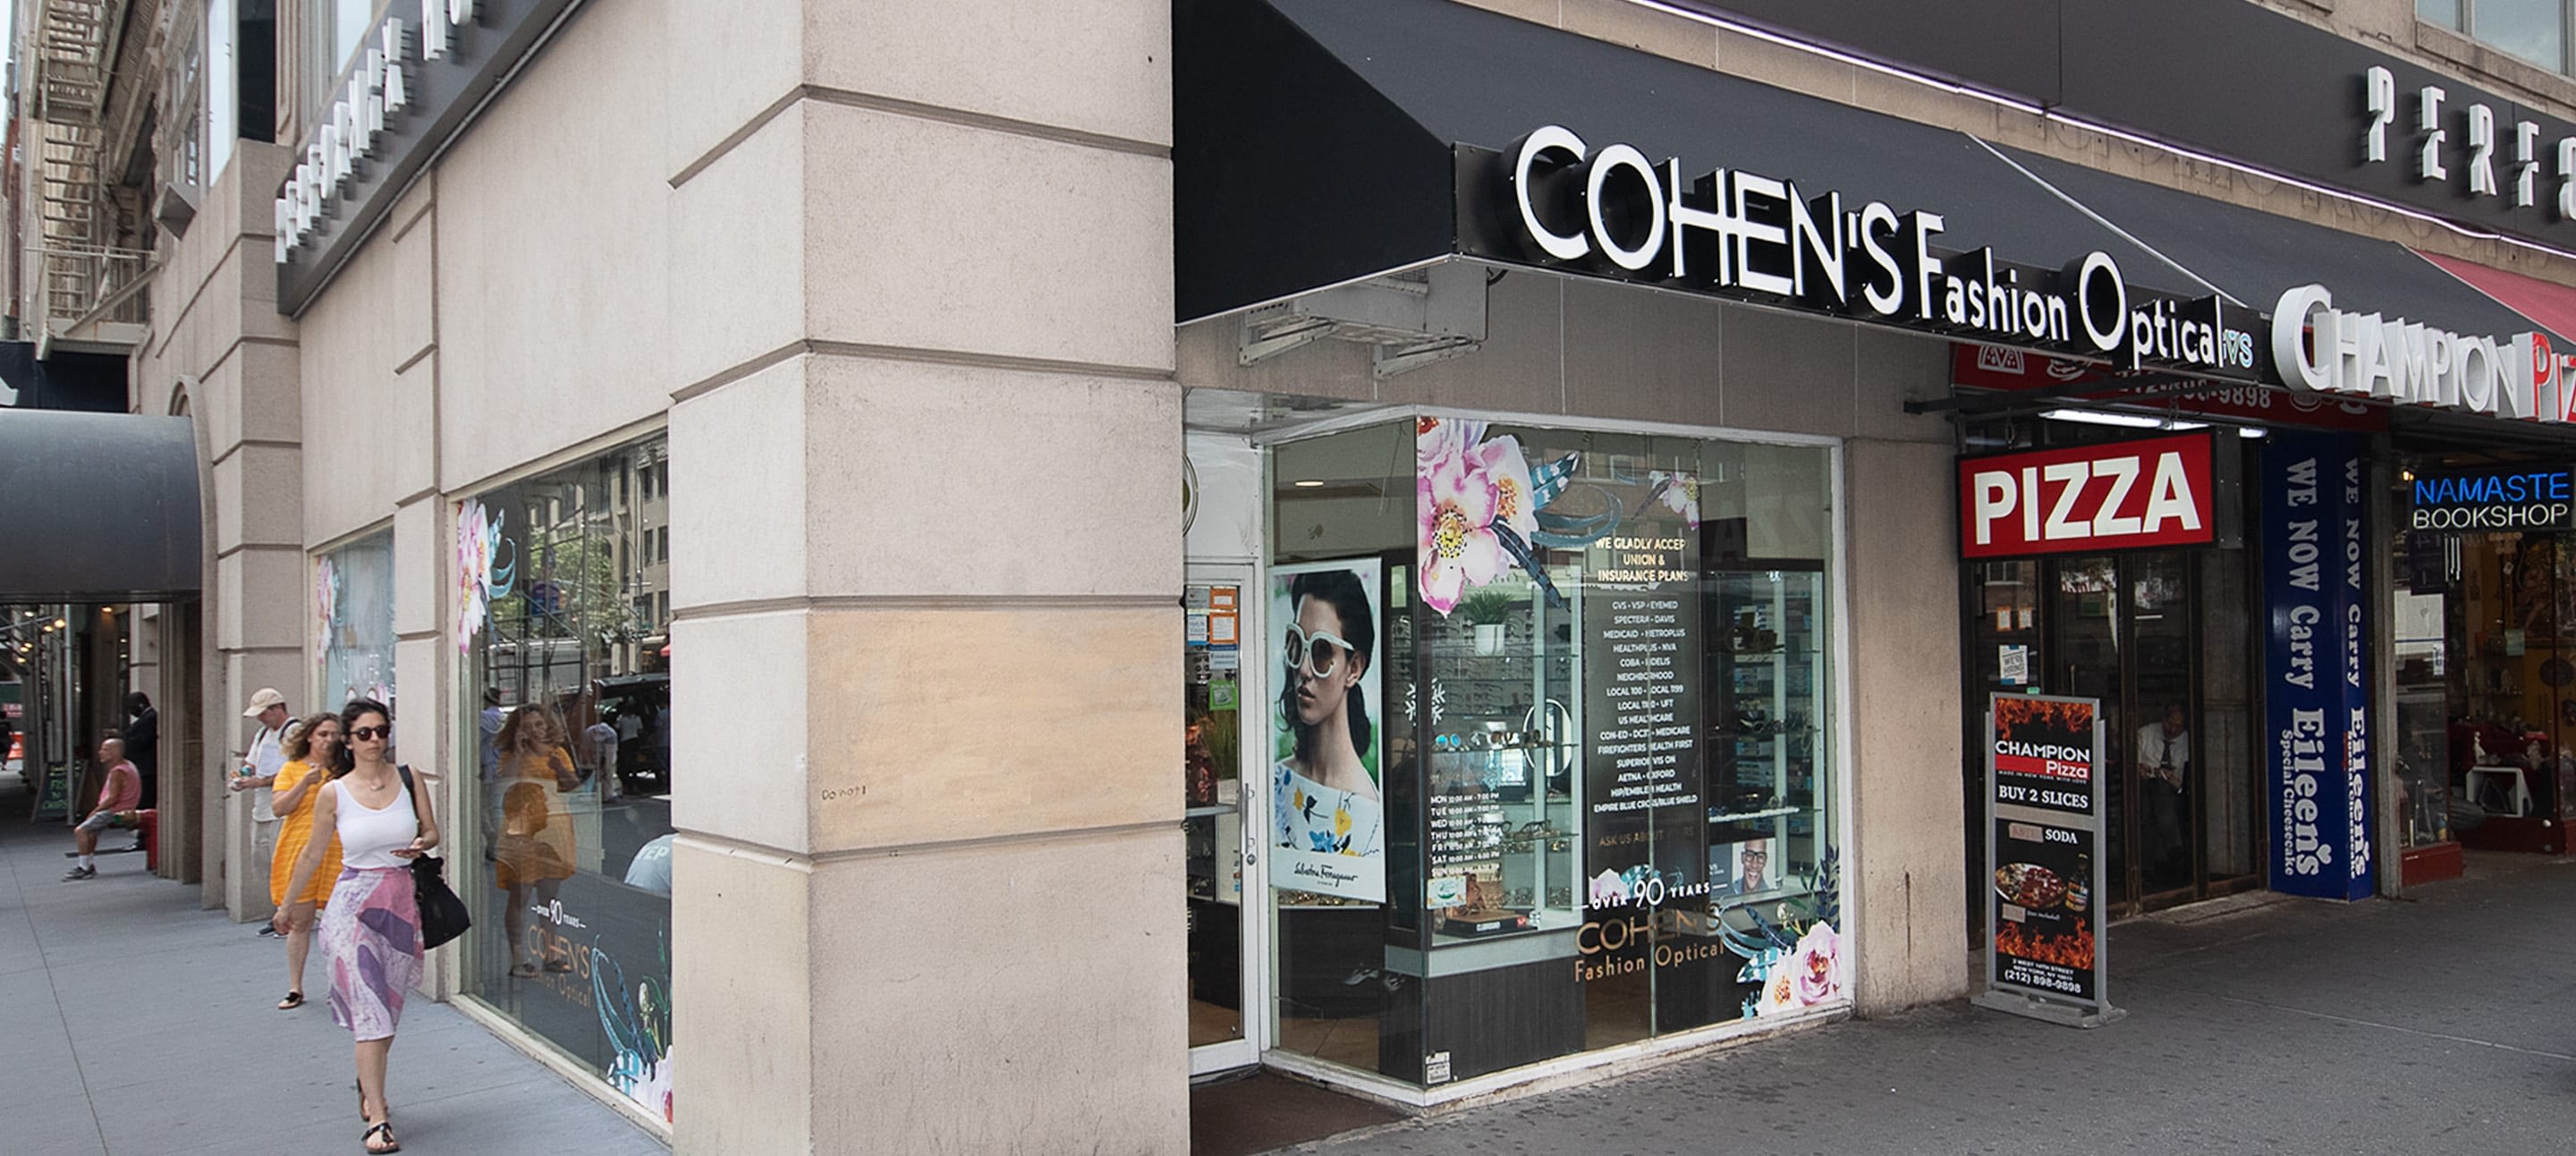 Cohen S Fashion Optical Up To 95 Off New York Ny Groupon